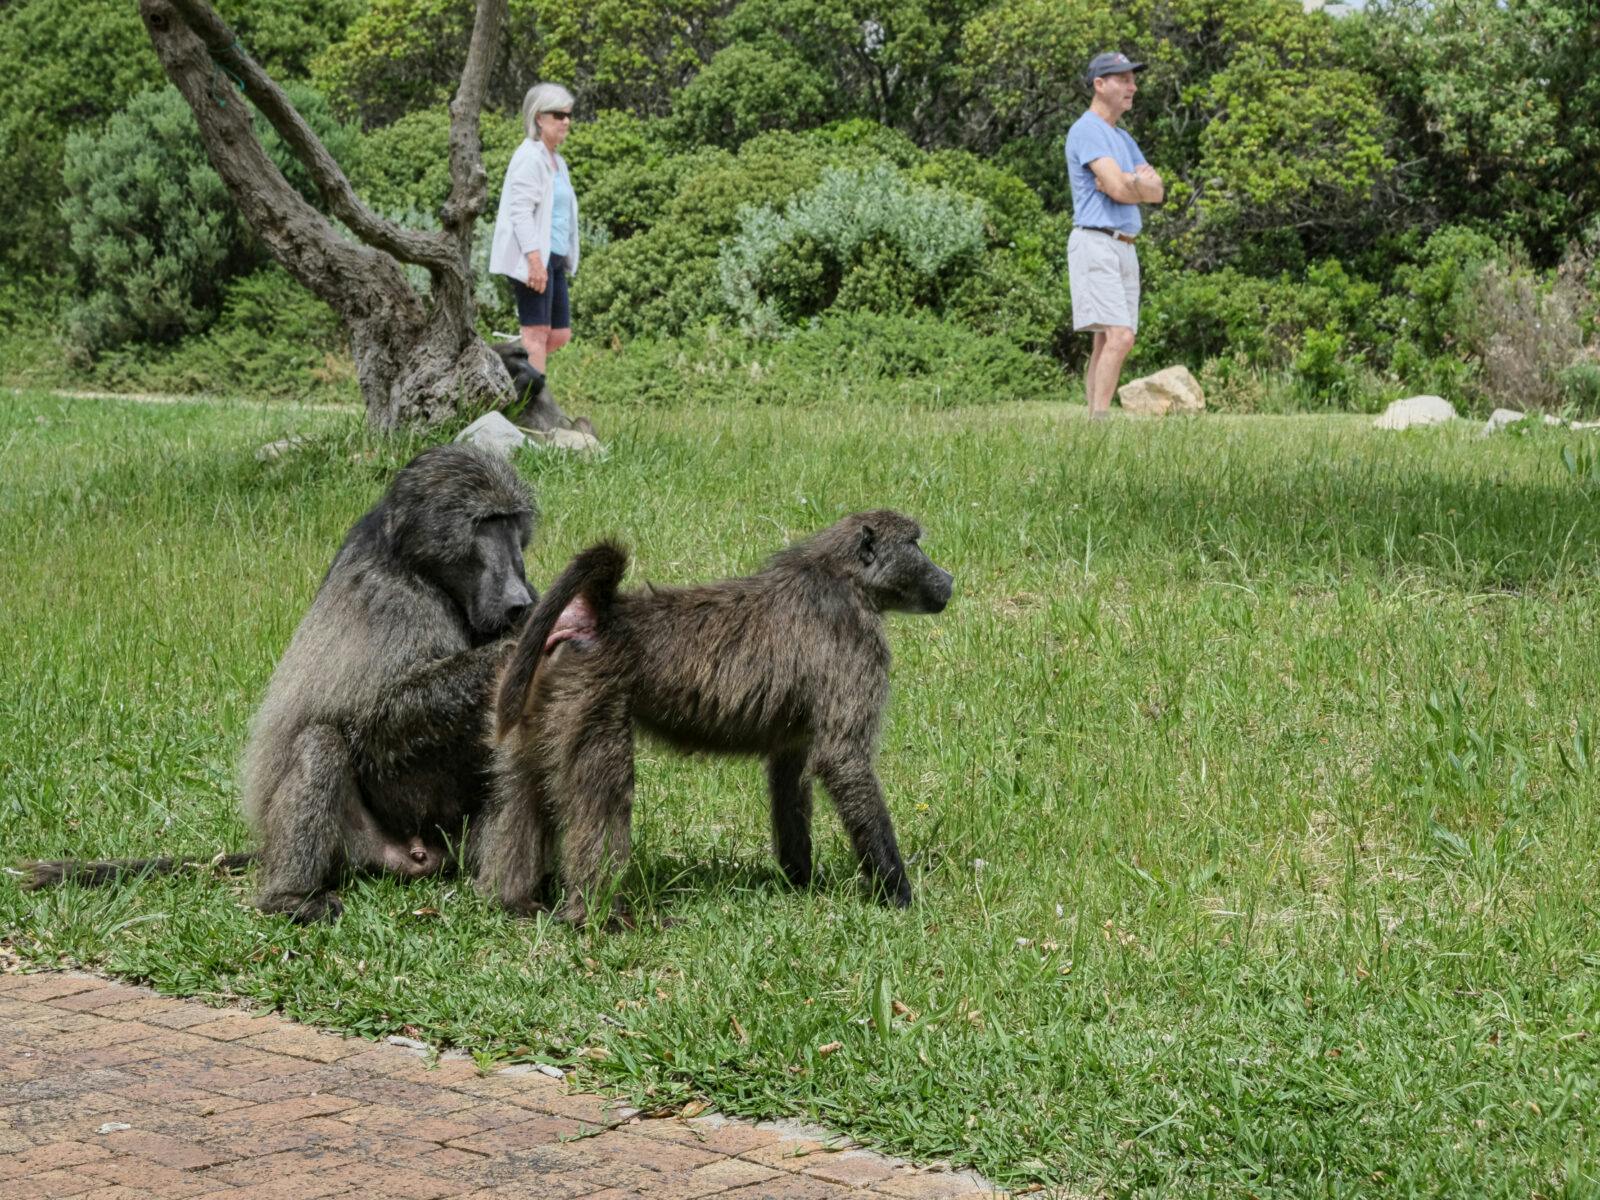 Lesley and Gavin Lundy, stroll past the baboons as they groom each other.